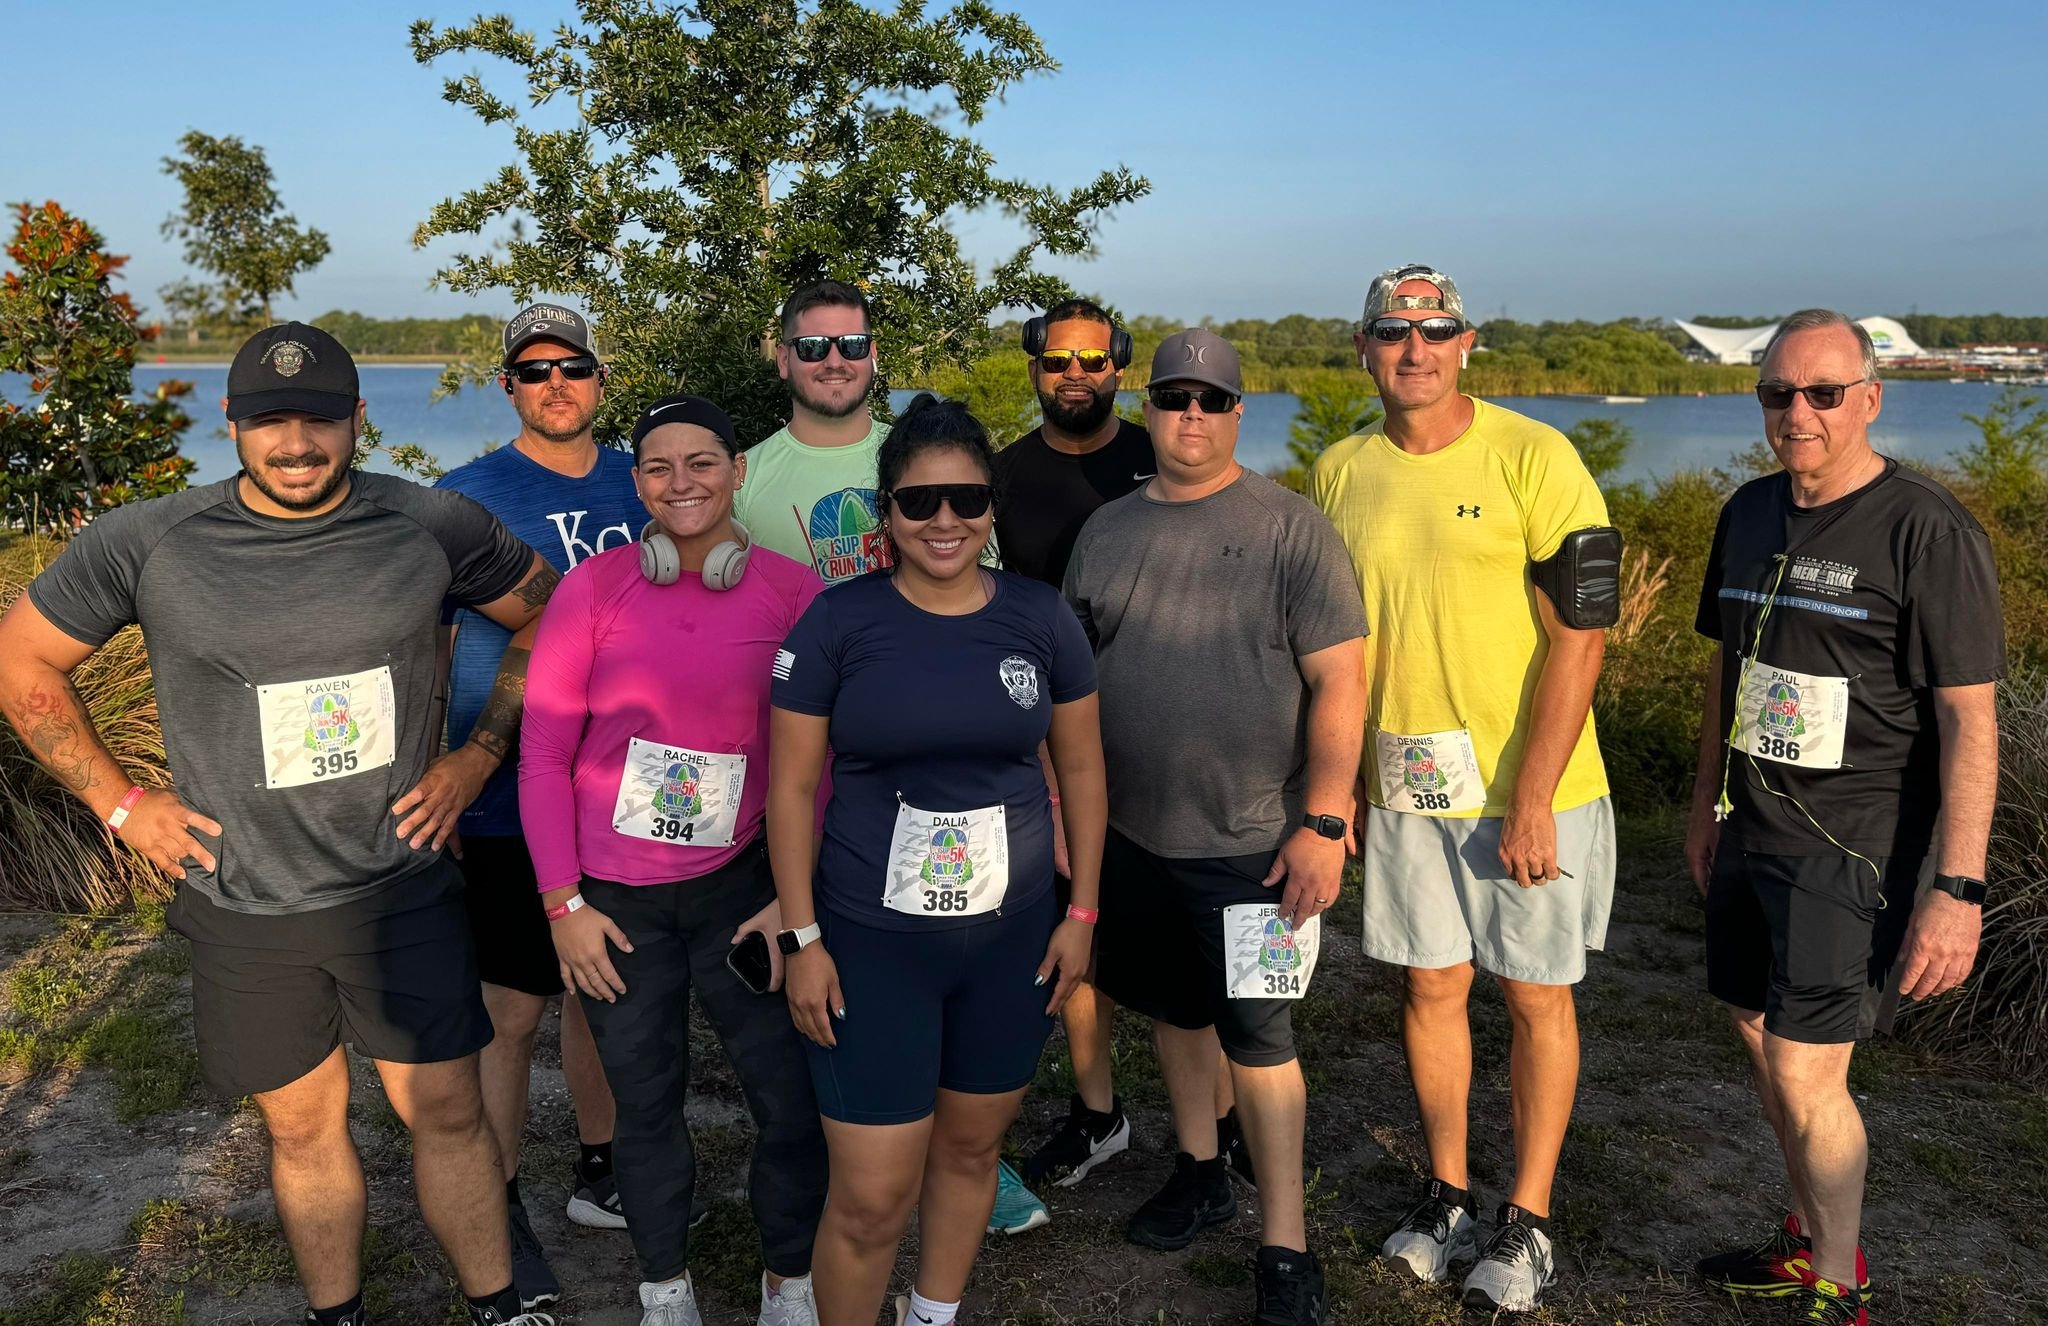 Over the weekend, members of BPD laced up for the 2024 SUP &amp; RUN 5K at Nathan Benderson Park. This annual event raises money for two amazing charities - Operation Second Chance supports wounded Veterans and active duty Purple Heart service member